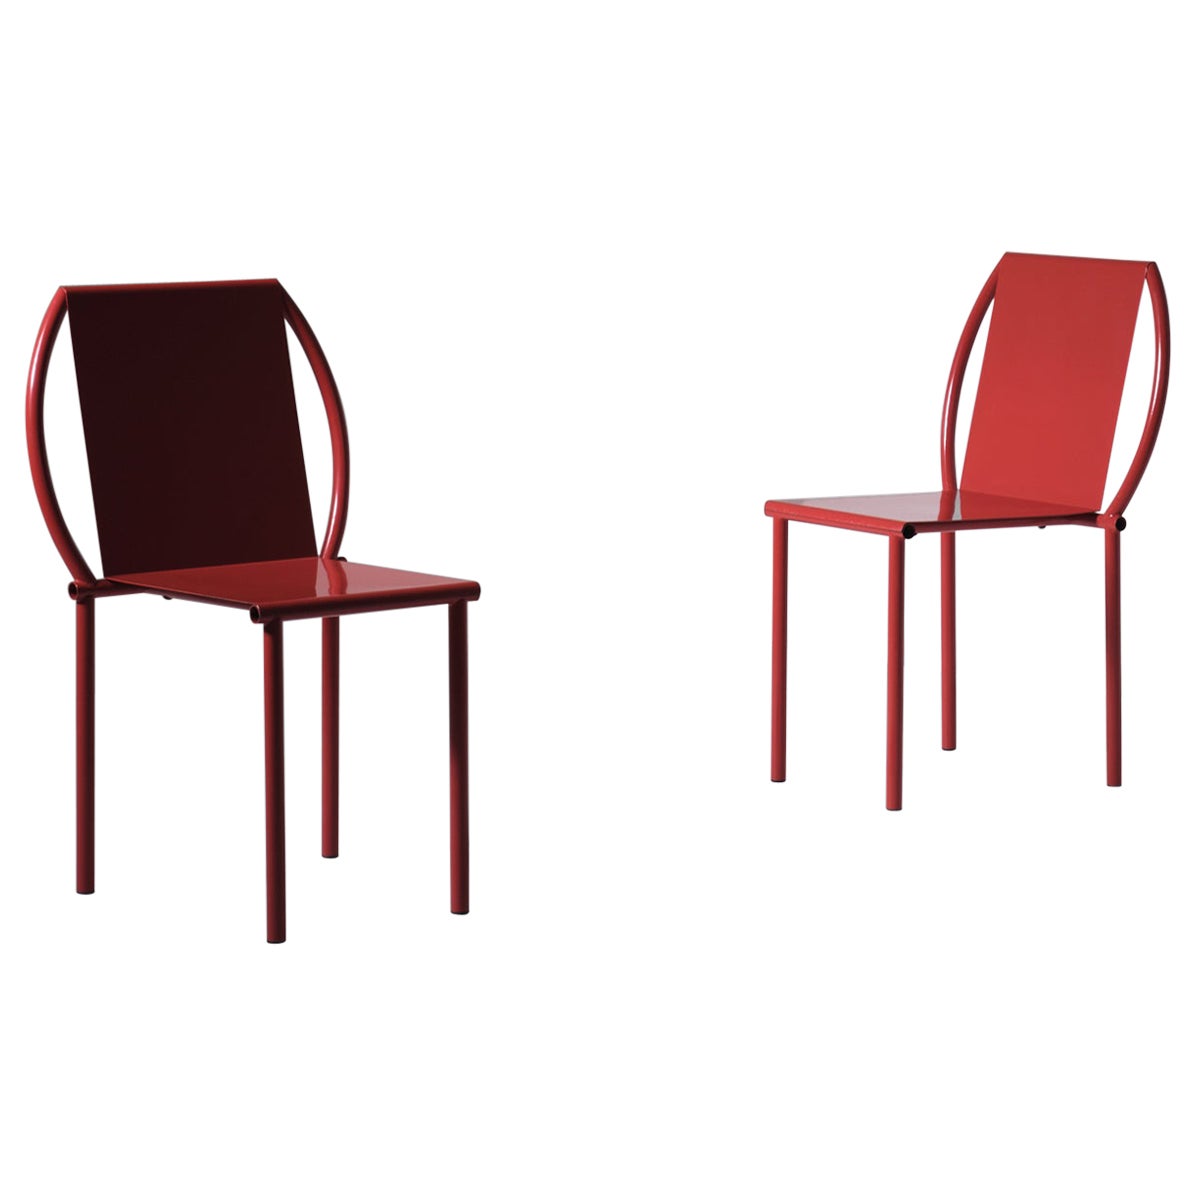 Pair of ‘Toro’ chairs by Martin Szekely, France 1987 For Sale